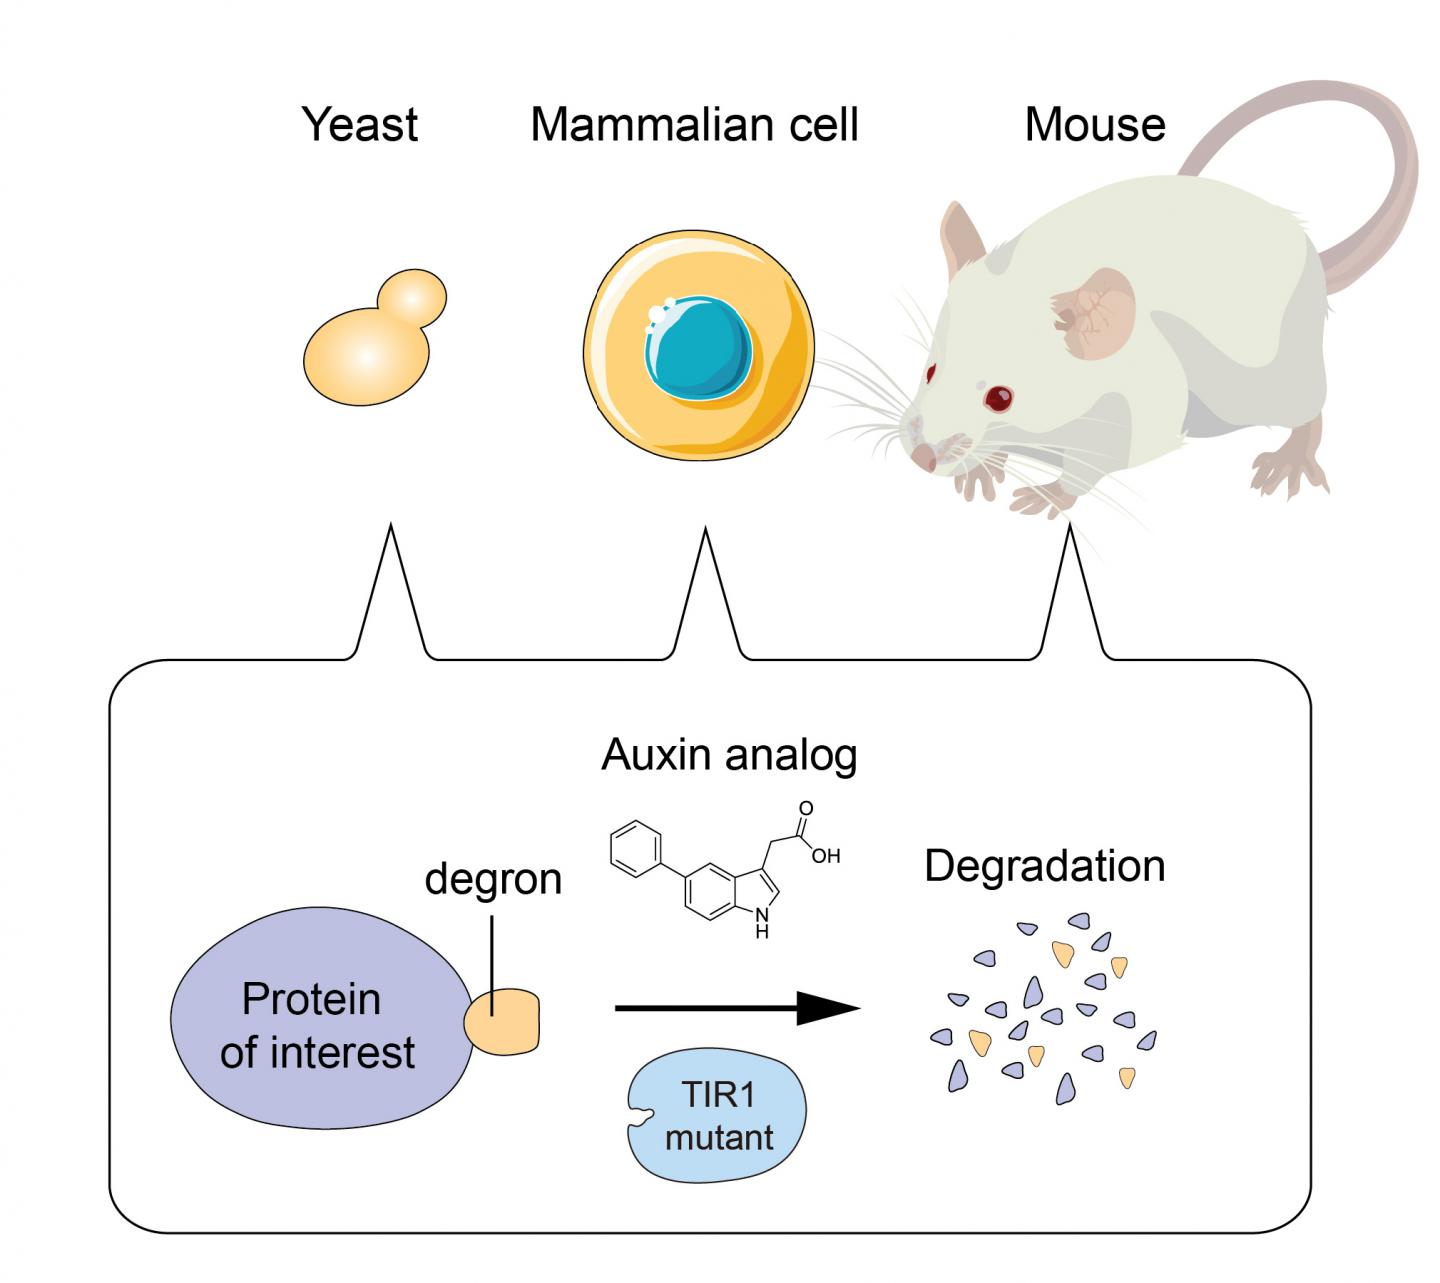 AID2 enables rapid target degradation in yeast, mammalian cells, and mice